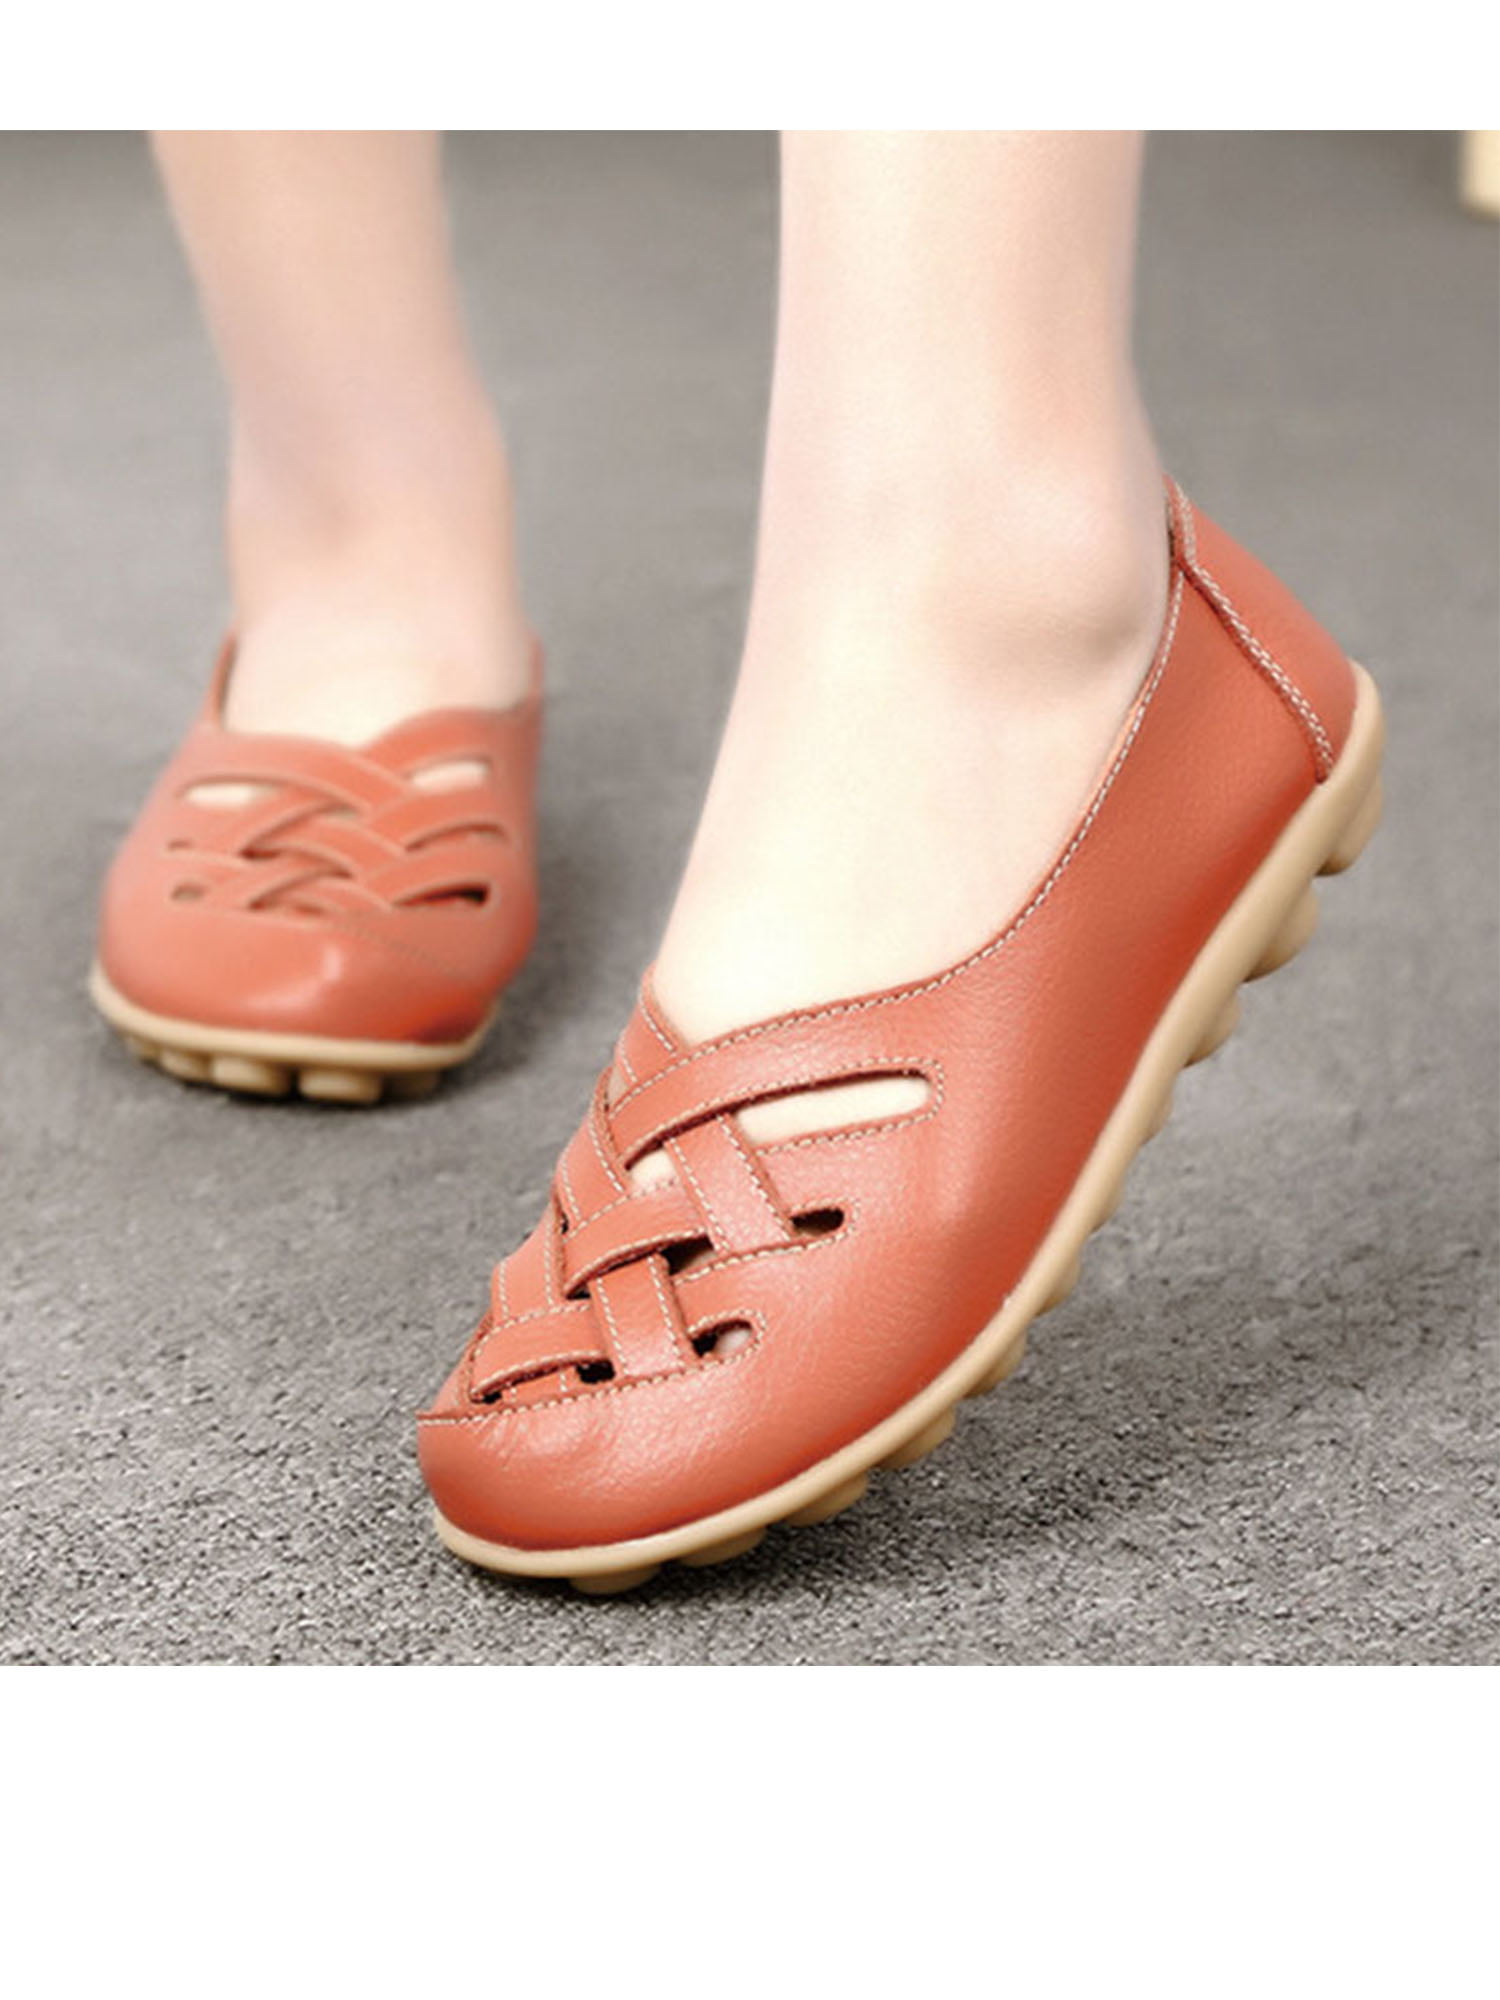 Womens Casual Shoes Leather Shoes Loafers Driving Peas Walking Moccasin Flat 